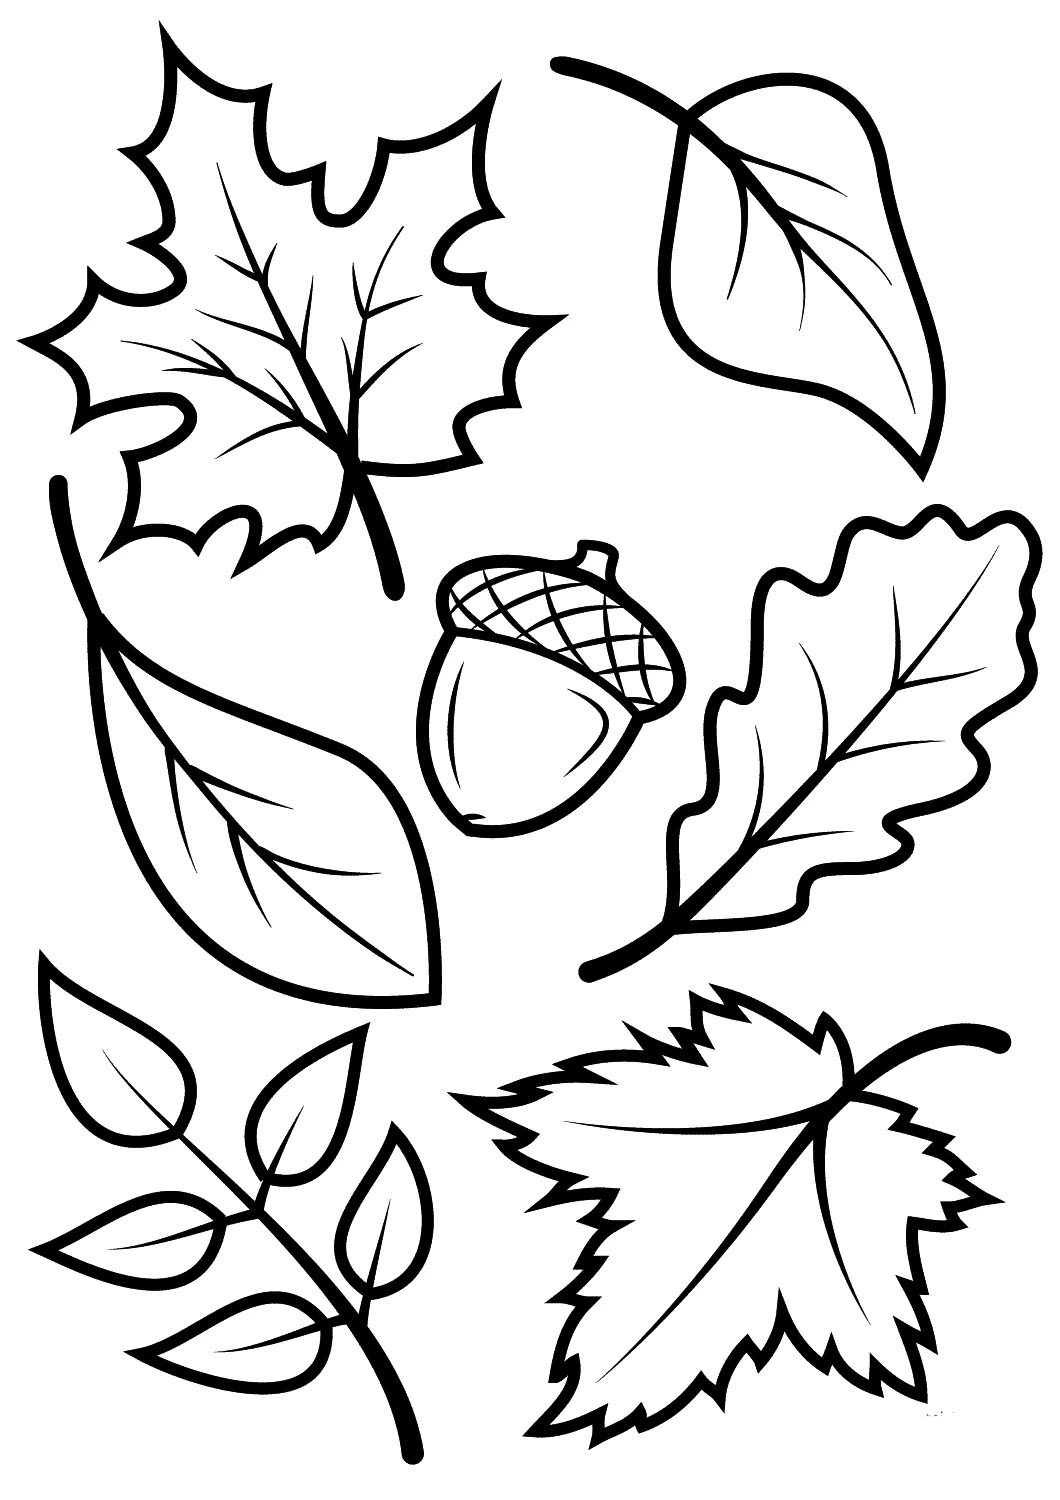 Fall Season Easy Coloring Pages for Kindergarten